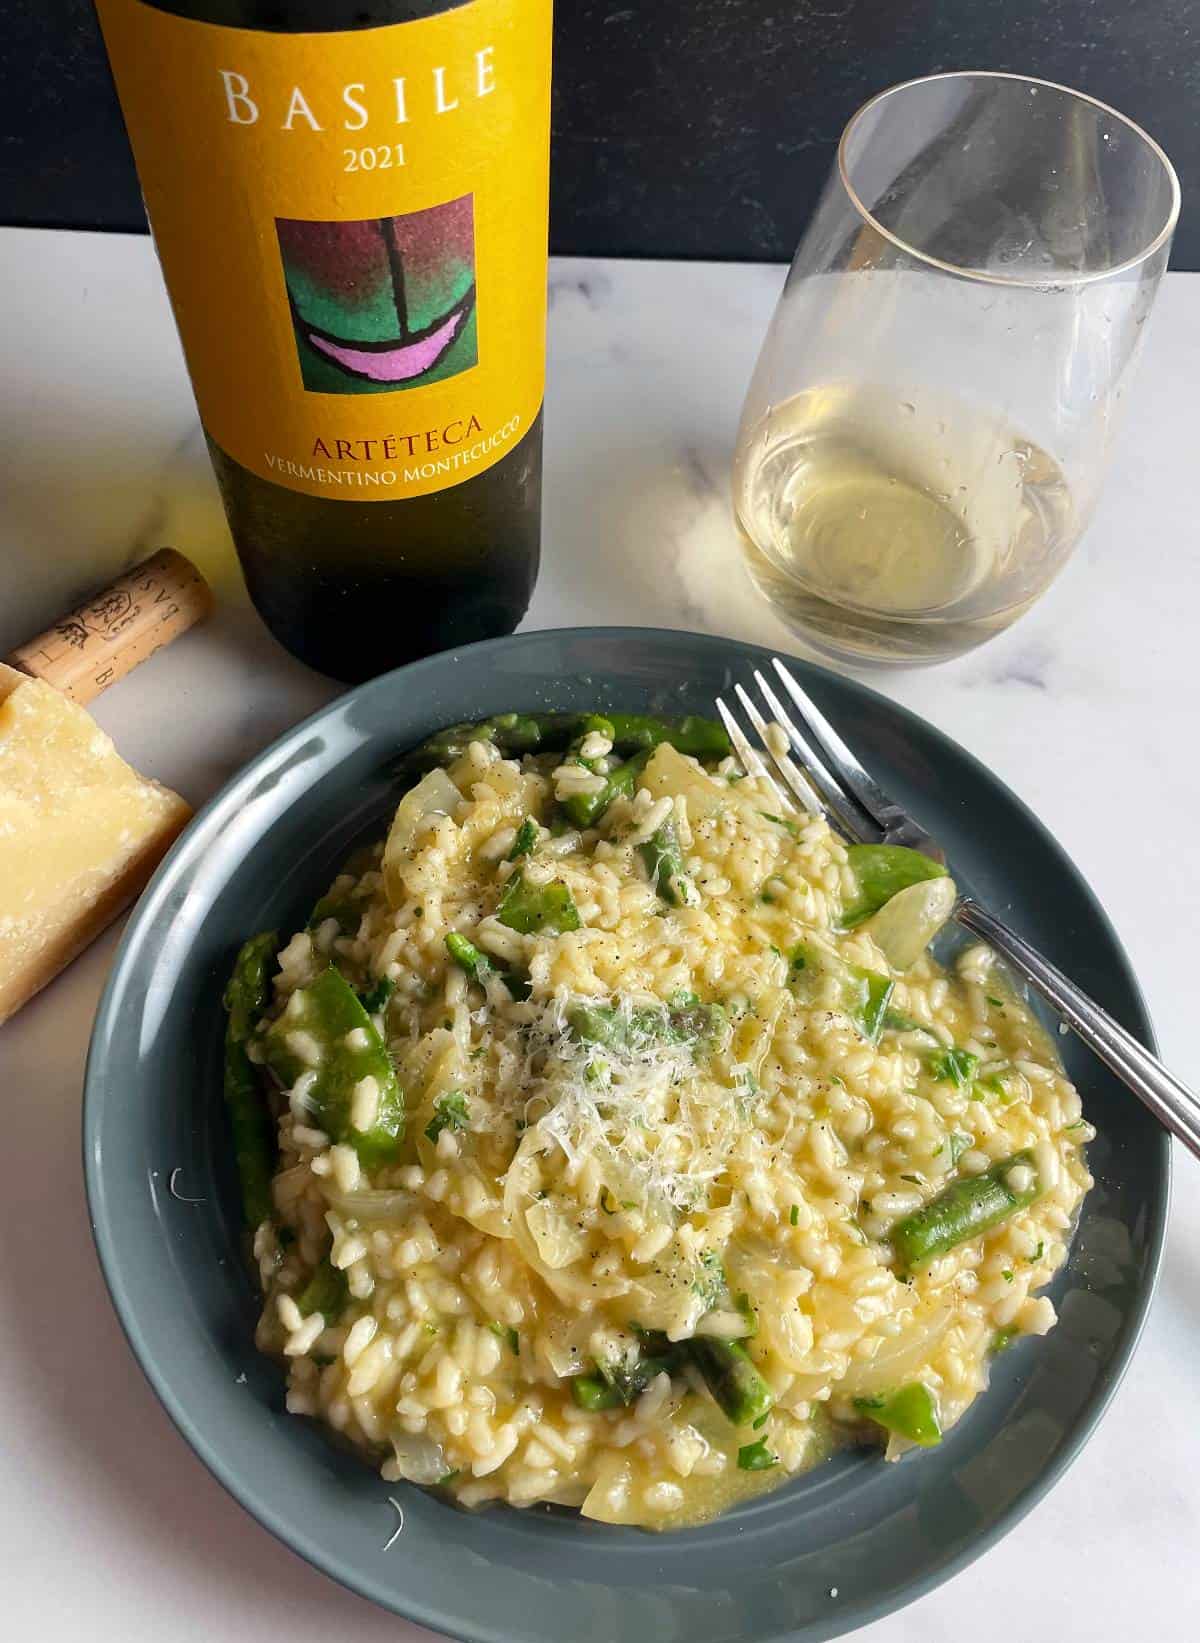 pea and asparagus risotto served with a Vermentino white wine.